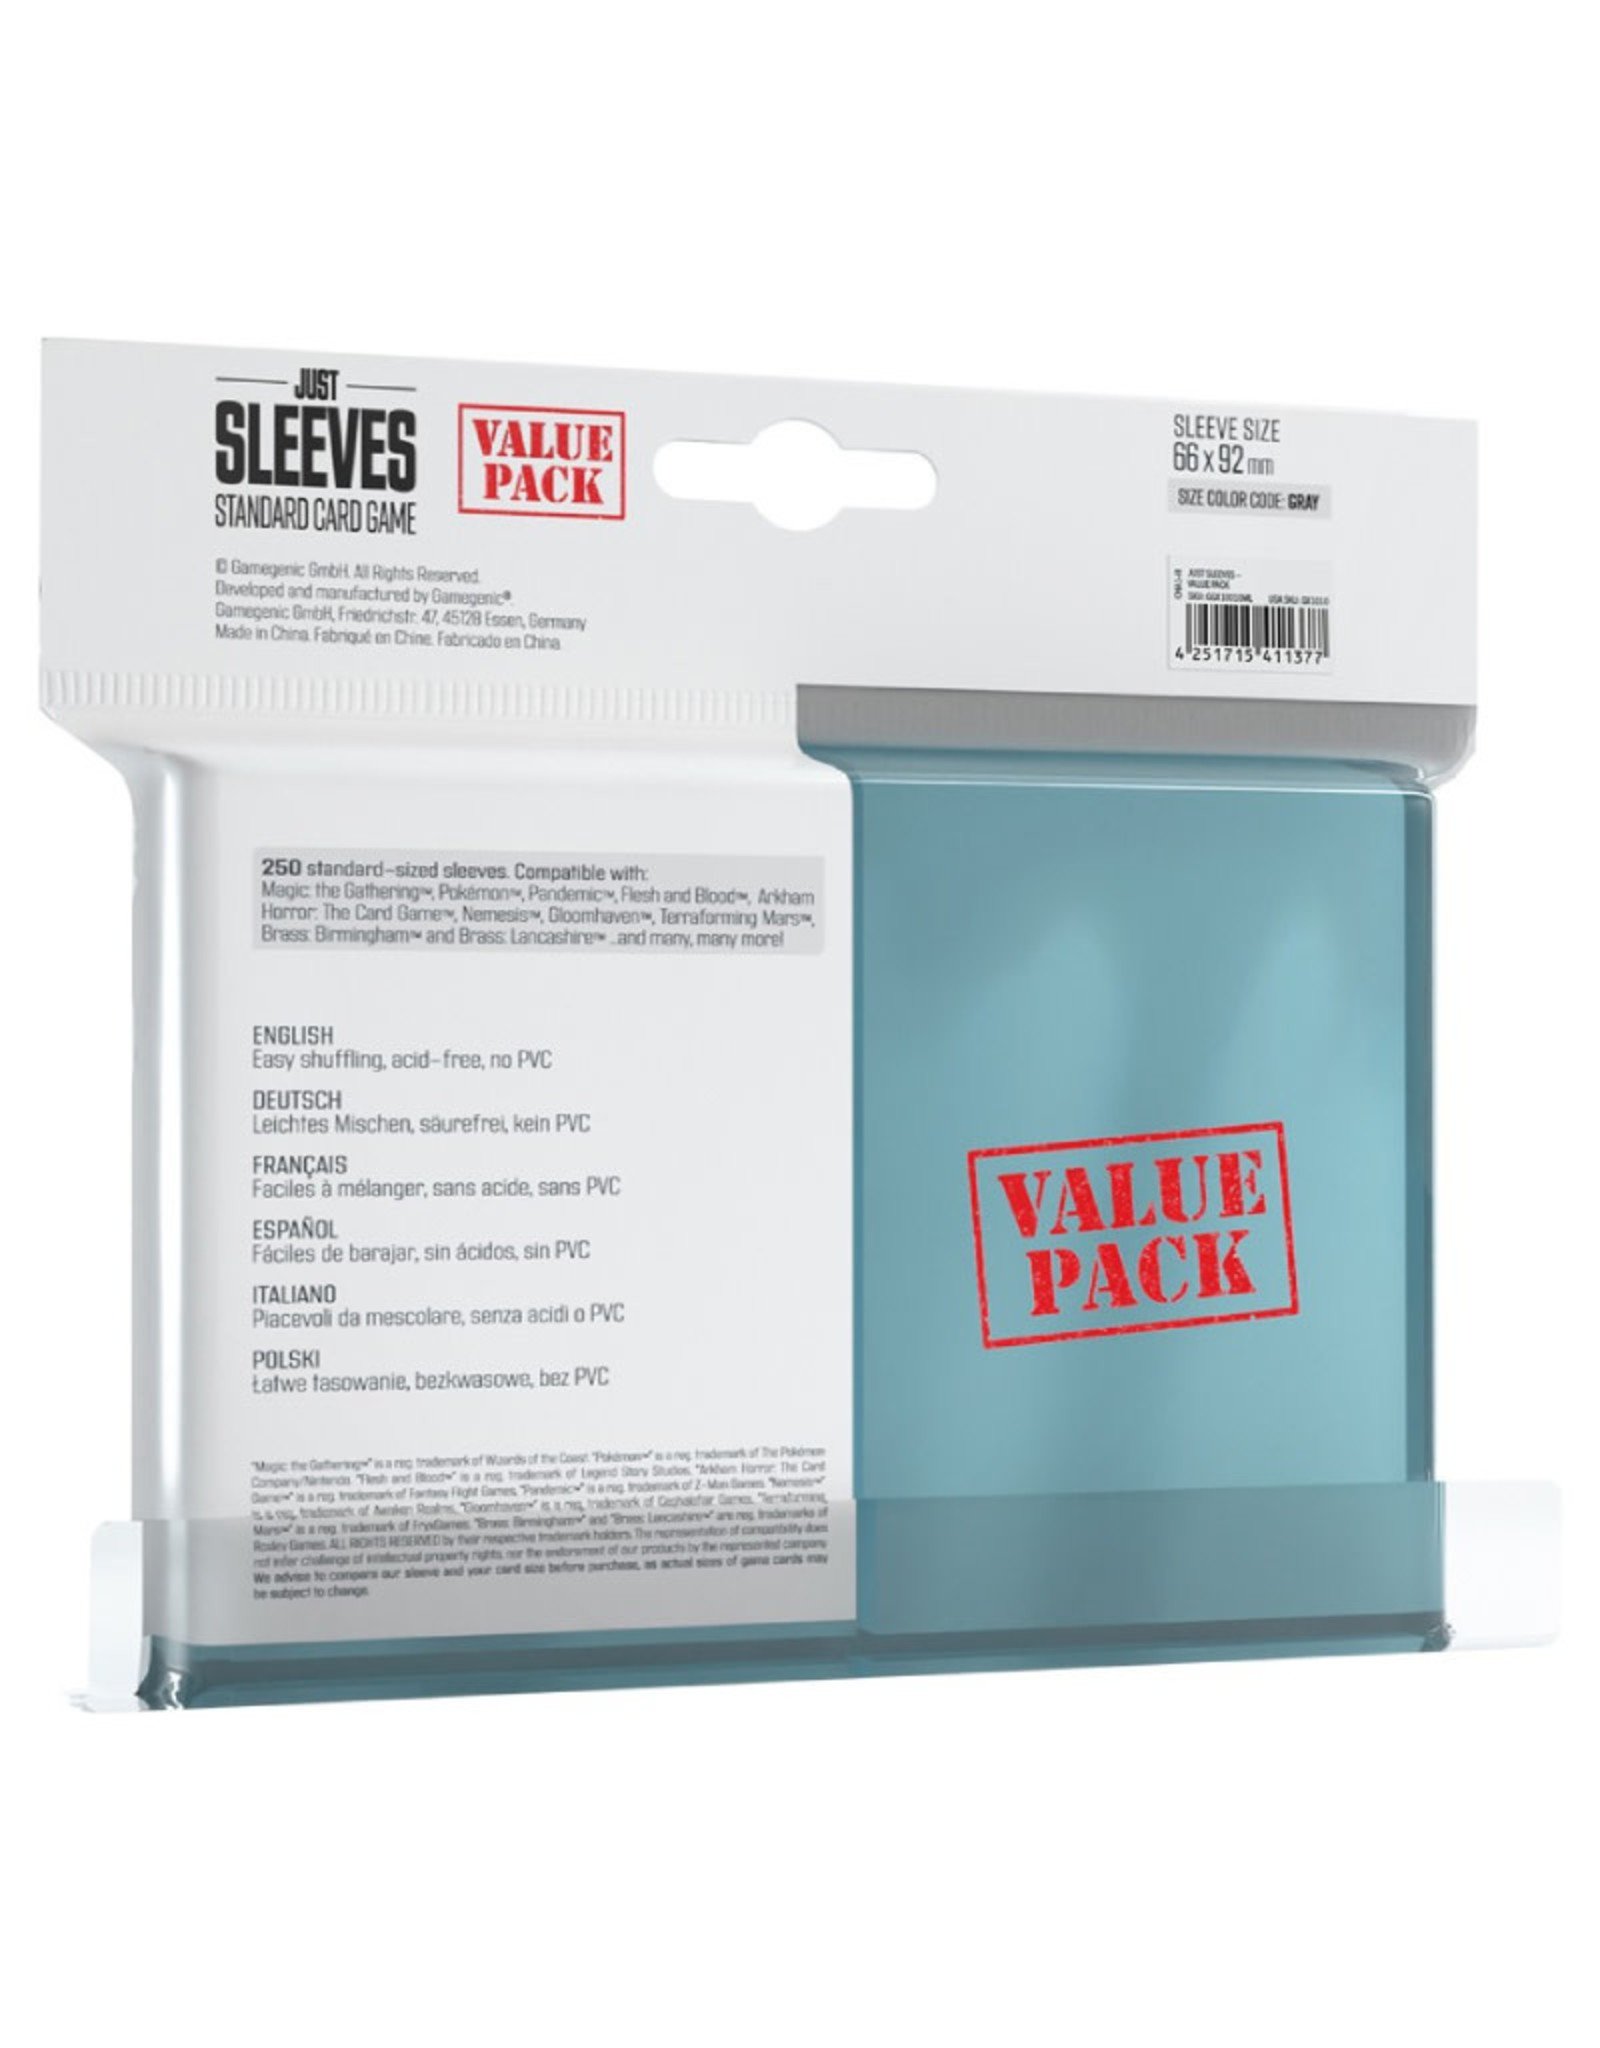 Just Sleeves: Standard Card Game Value Pack (250) Clear